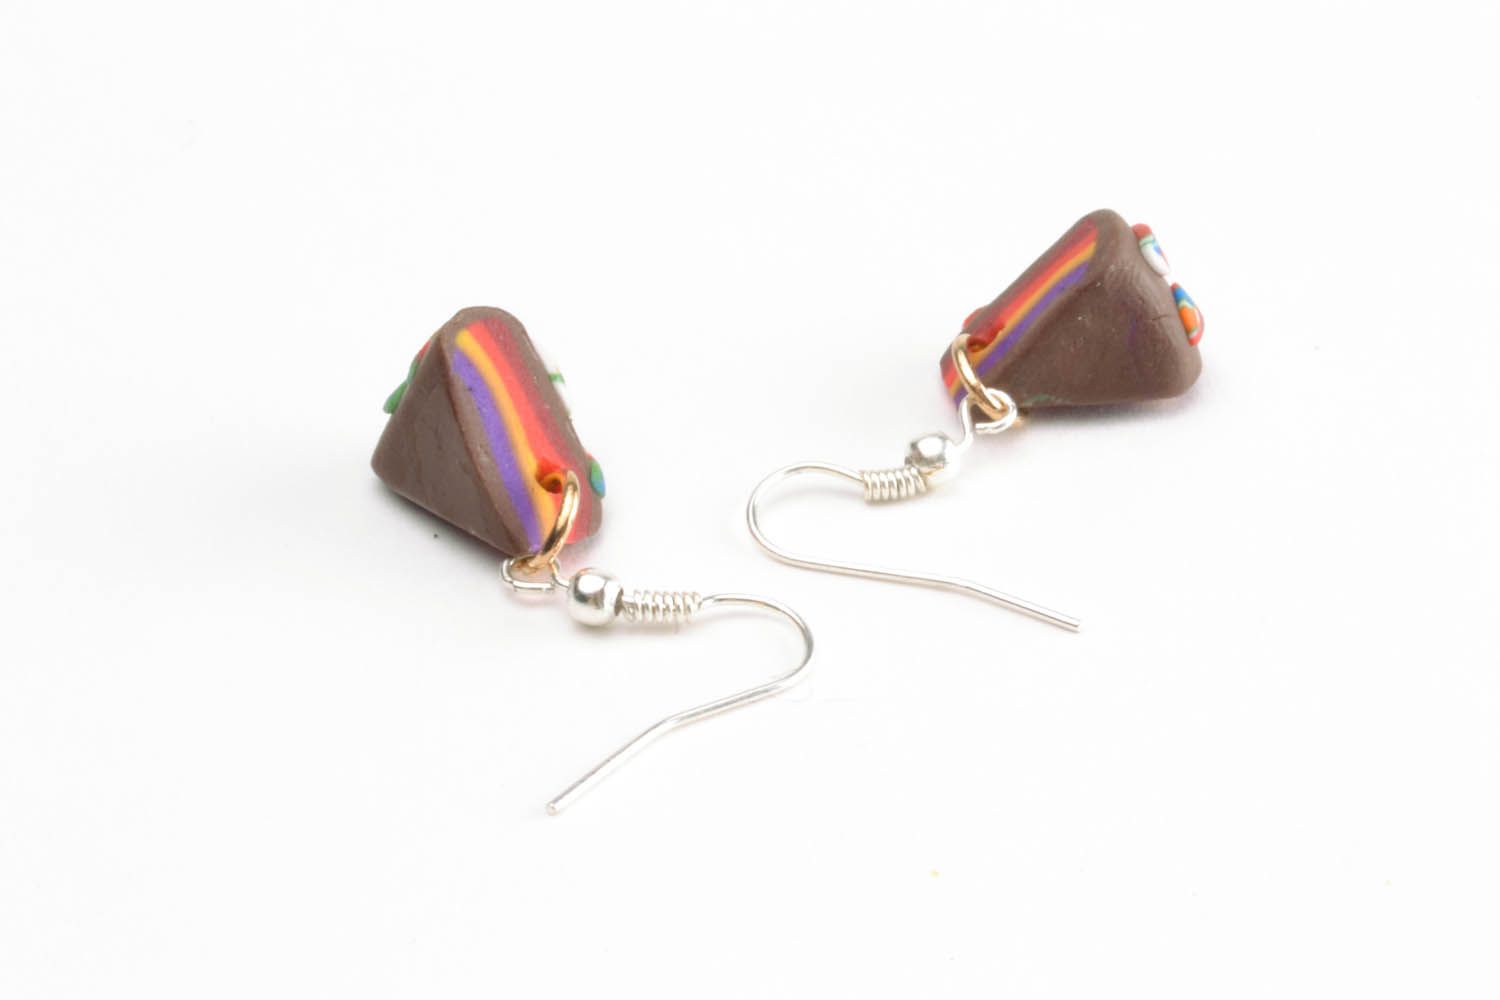 Cake-shaped earrings made of polymer clay photo 4